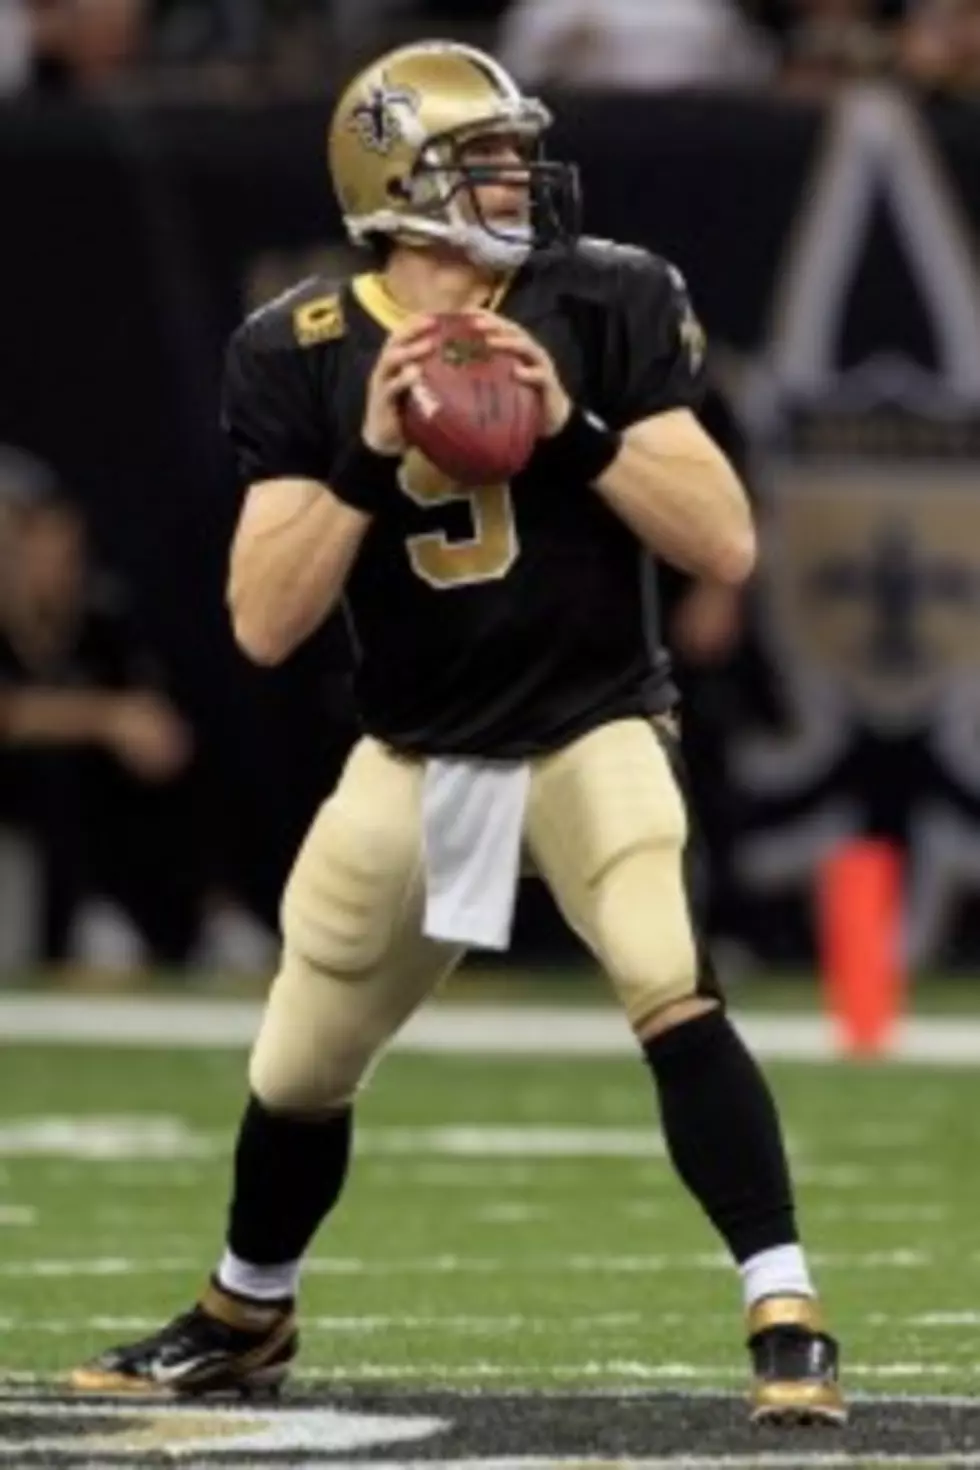 Saints Make New Contract Proposal To Brees